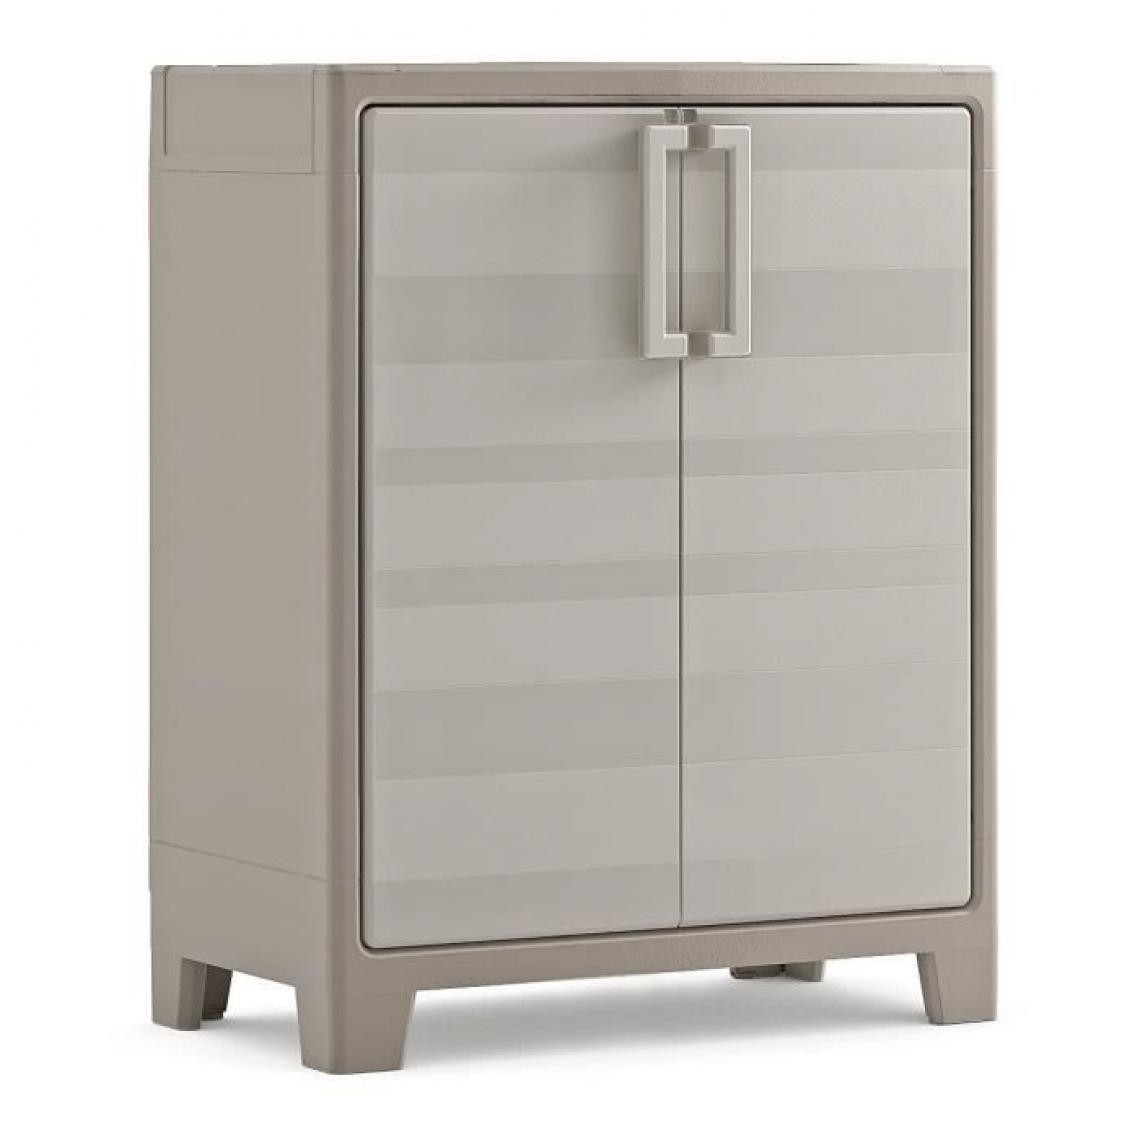 Keter - Armoire basse GULLIVER - Beige Sable - Armoires